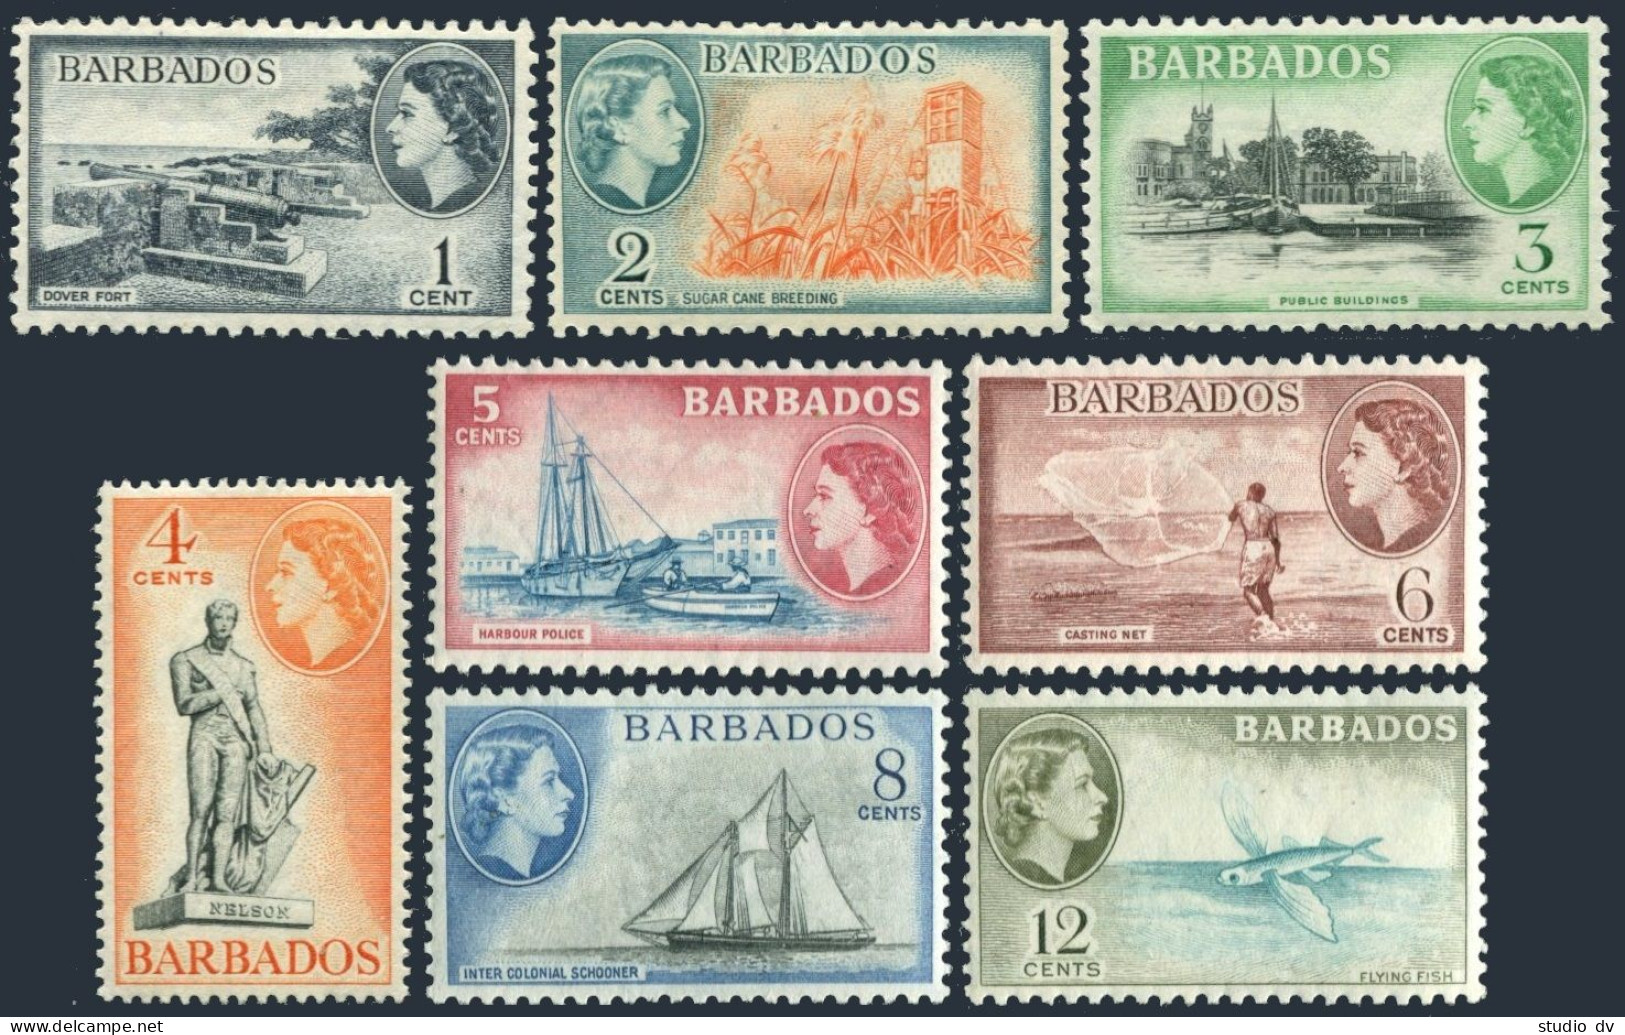 Barbados 235-242,hinged.Mi 203-210. QE II,1953.Dover Fort,Sugar Cane,Nelson,Ship - Barbades (1966-...)